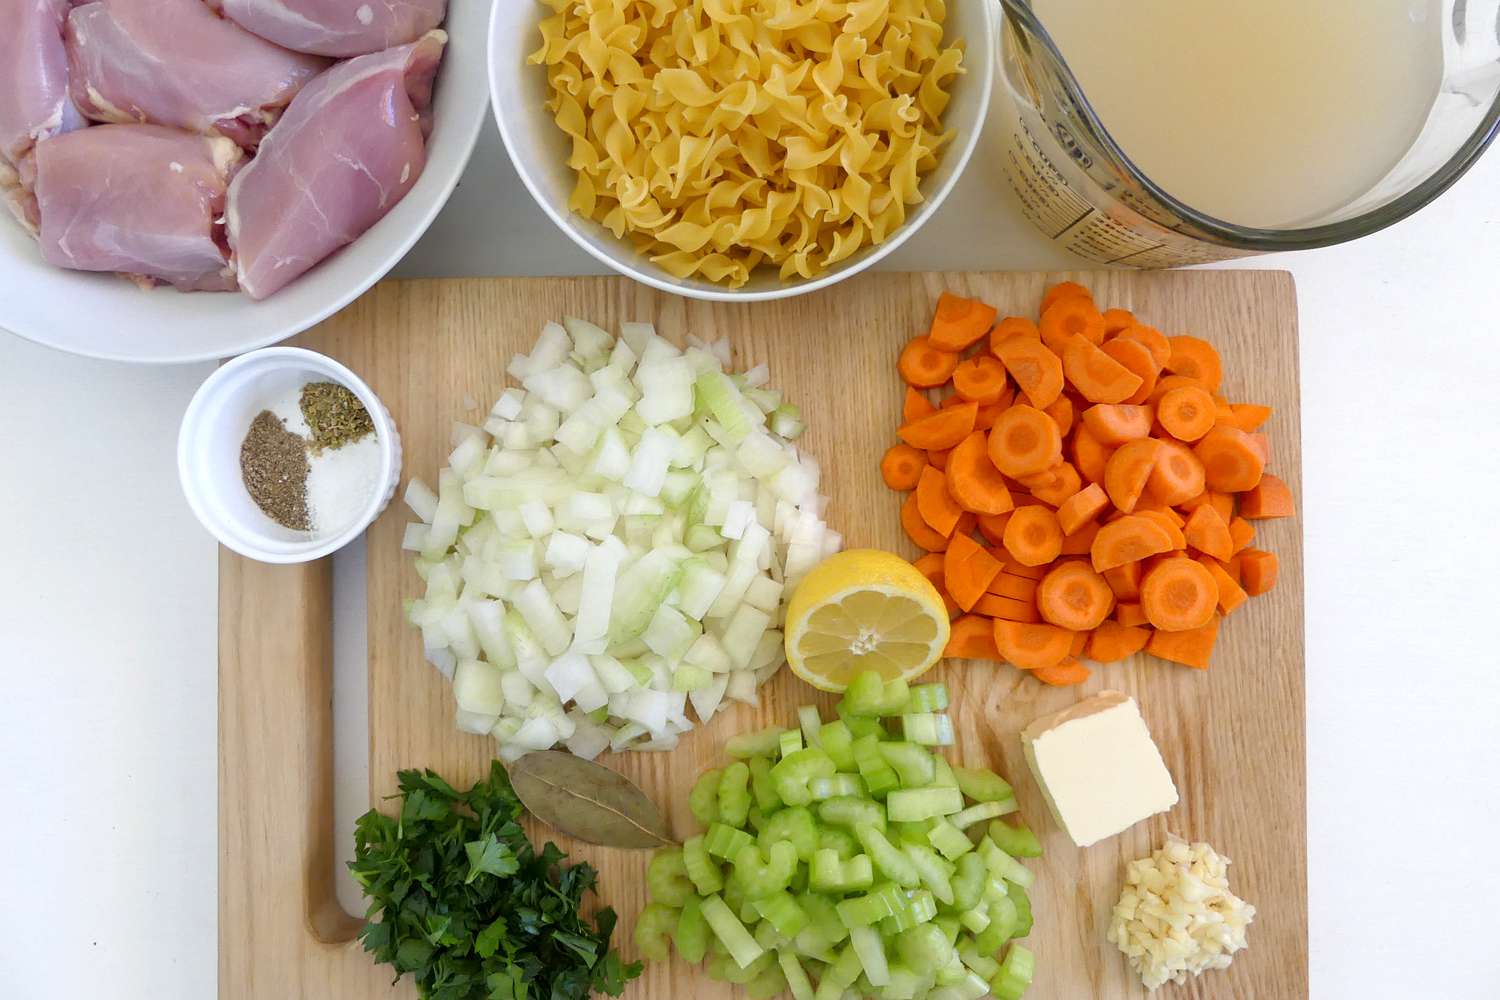 Ingredients for Instant Pot Chicken Noodle Soup